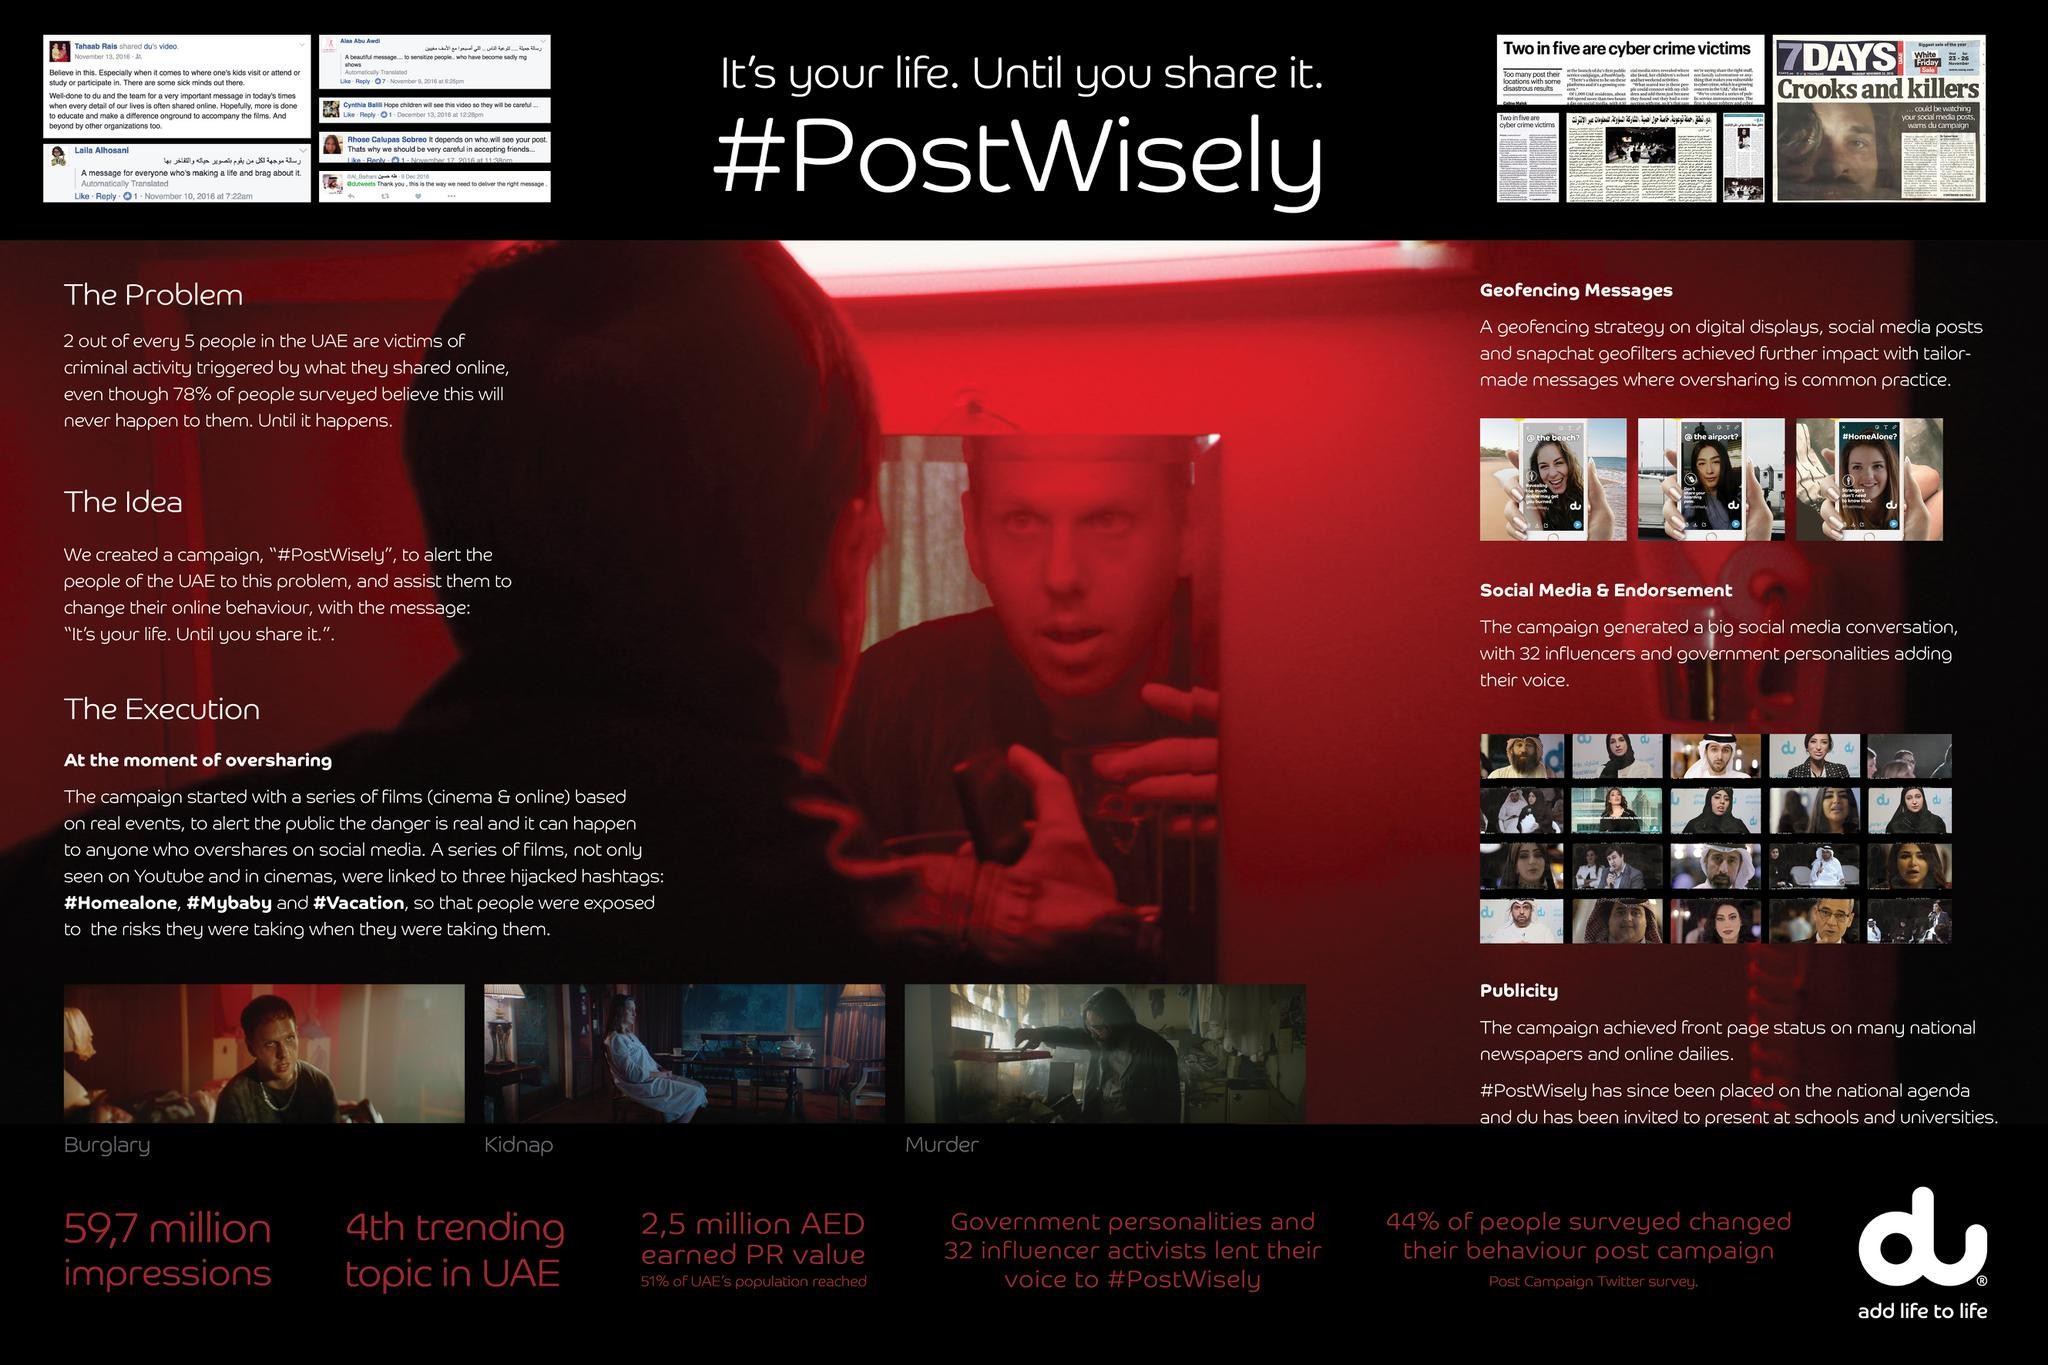 #PostWisely